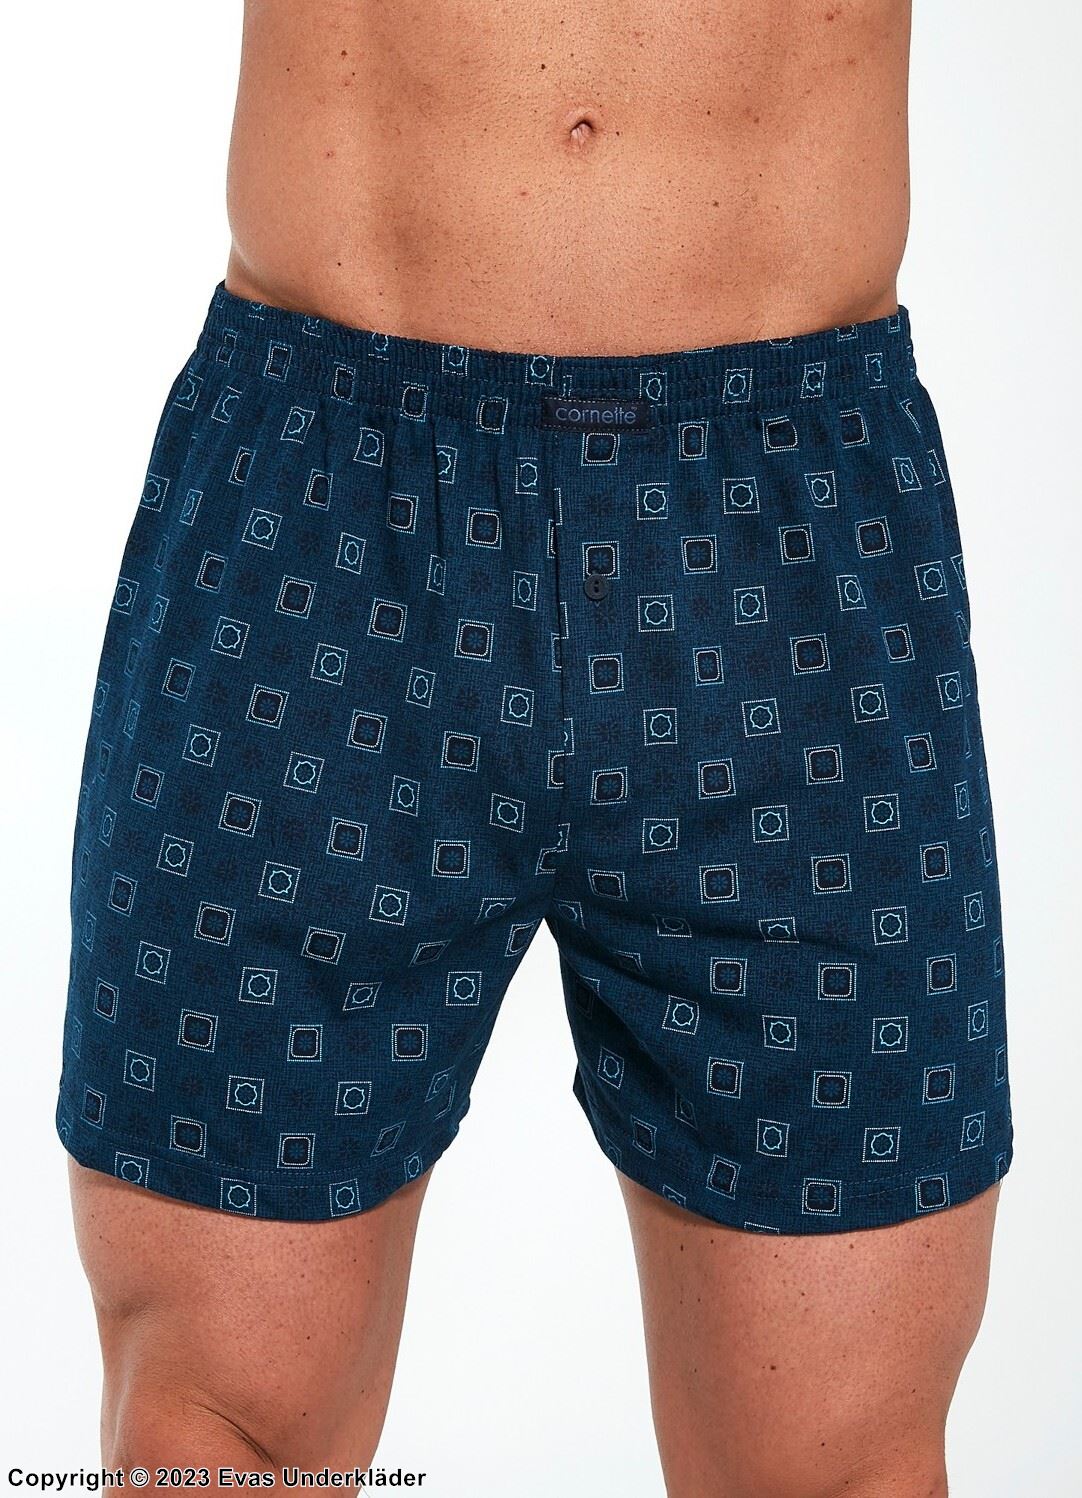 Men's boxer briefs, high quality cotton, without fly